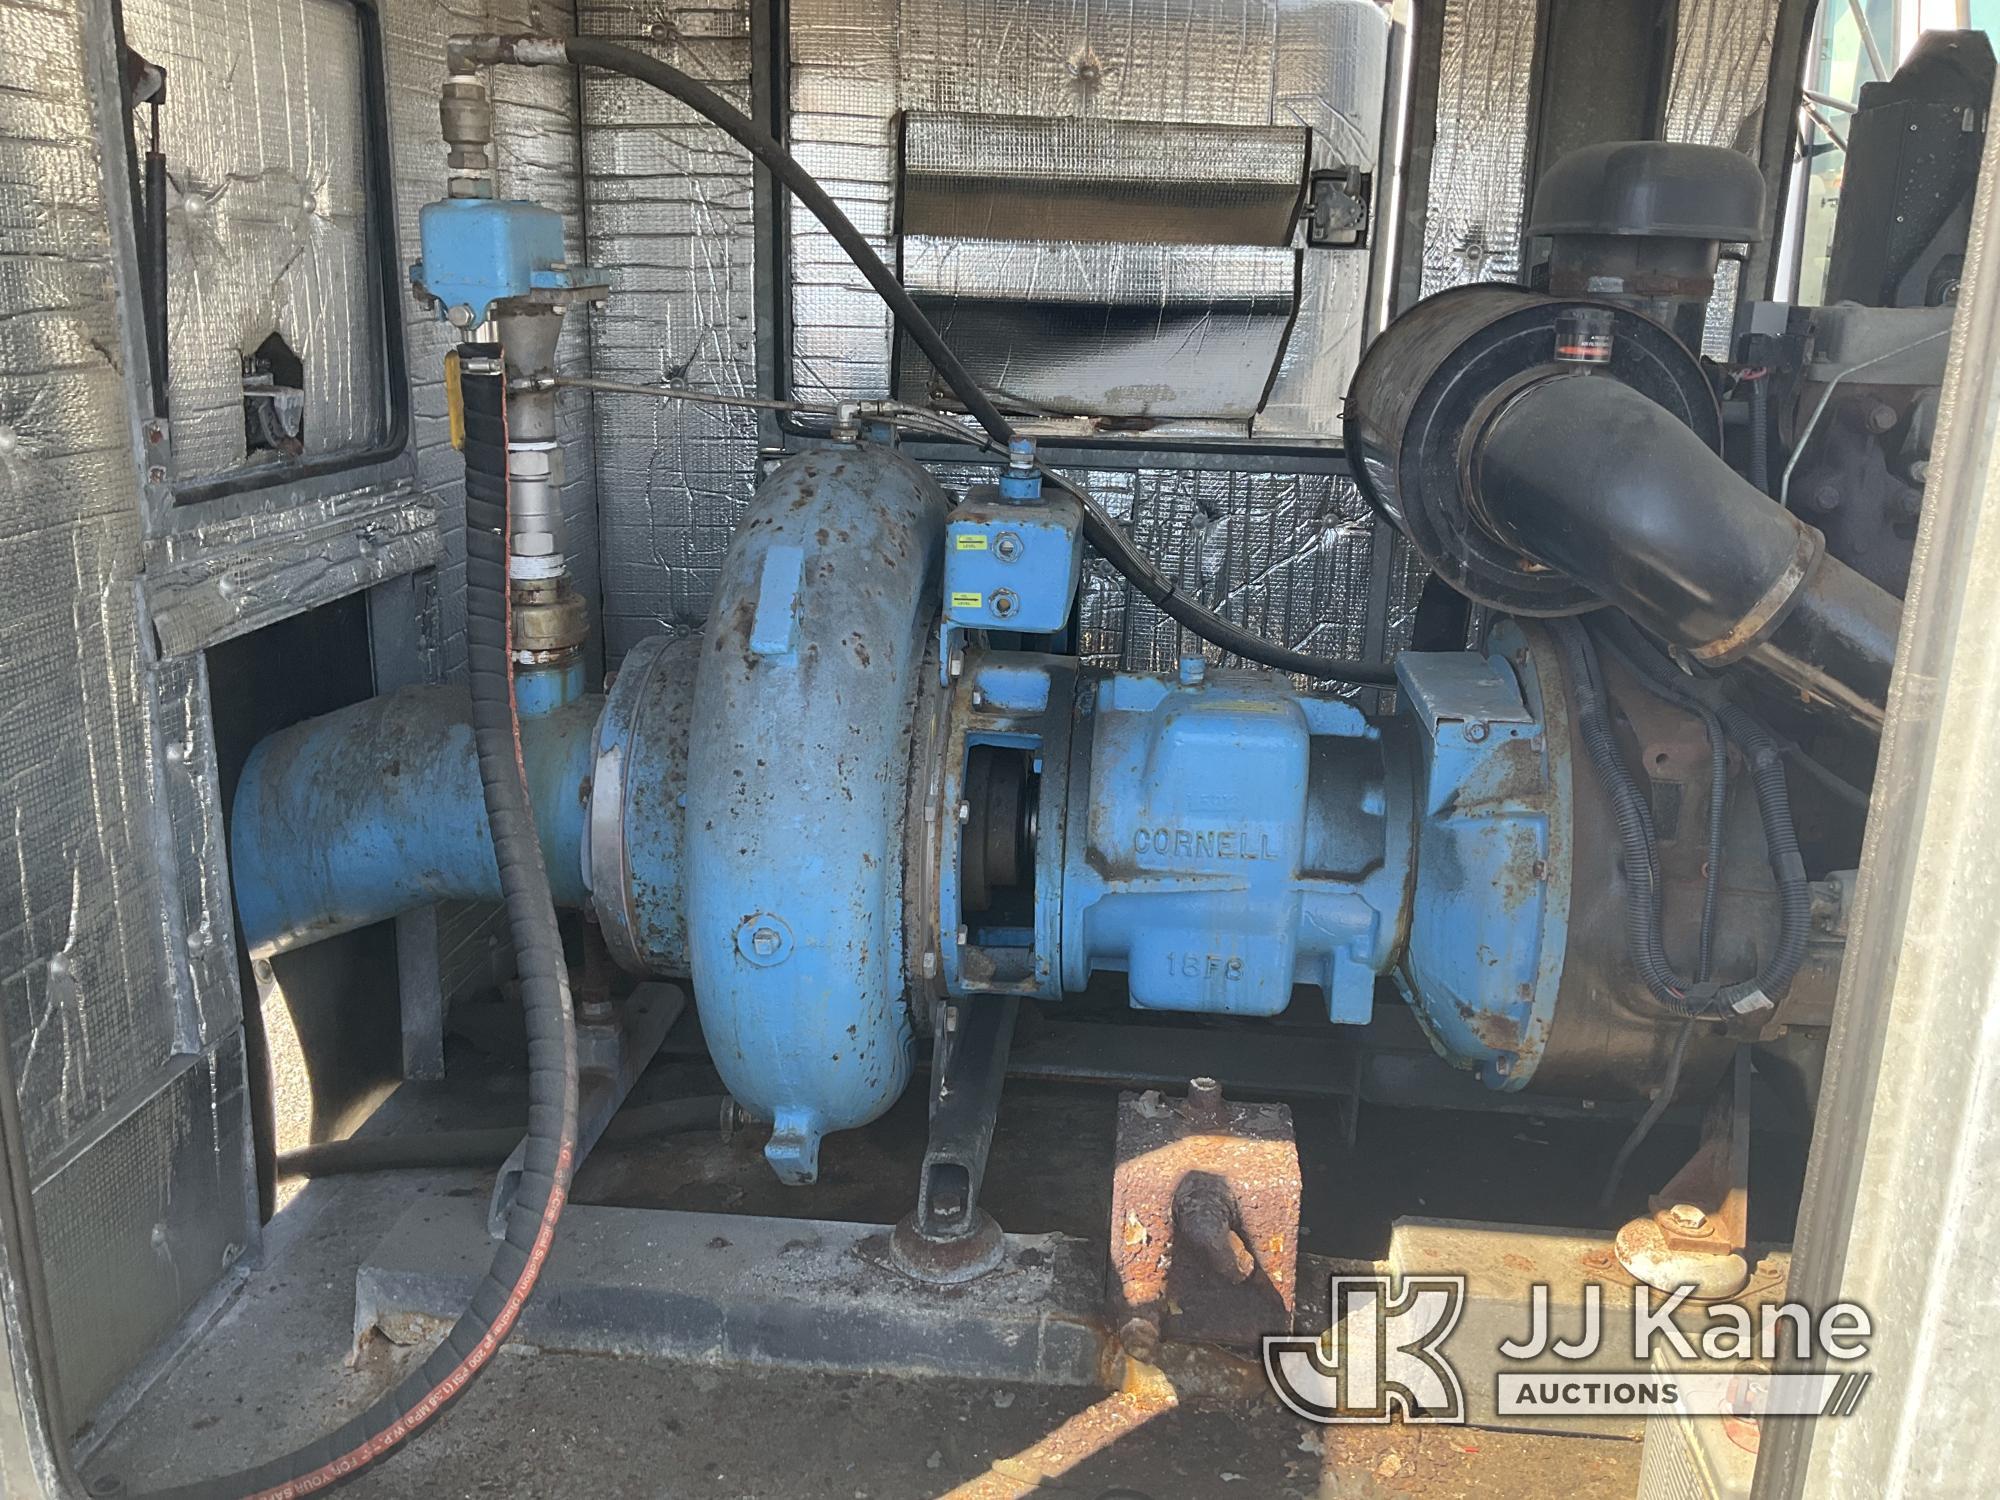 (Jurupa Valley, CA) 2007 Portable Pump Not Running, Missing Key, True Hours Unknown, Application for